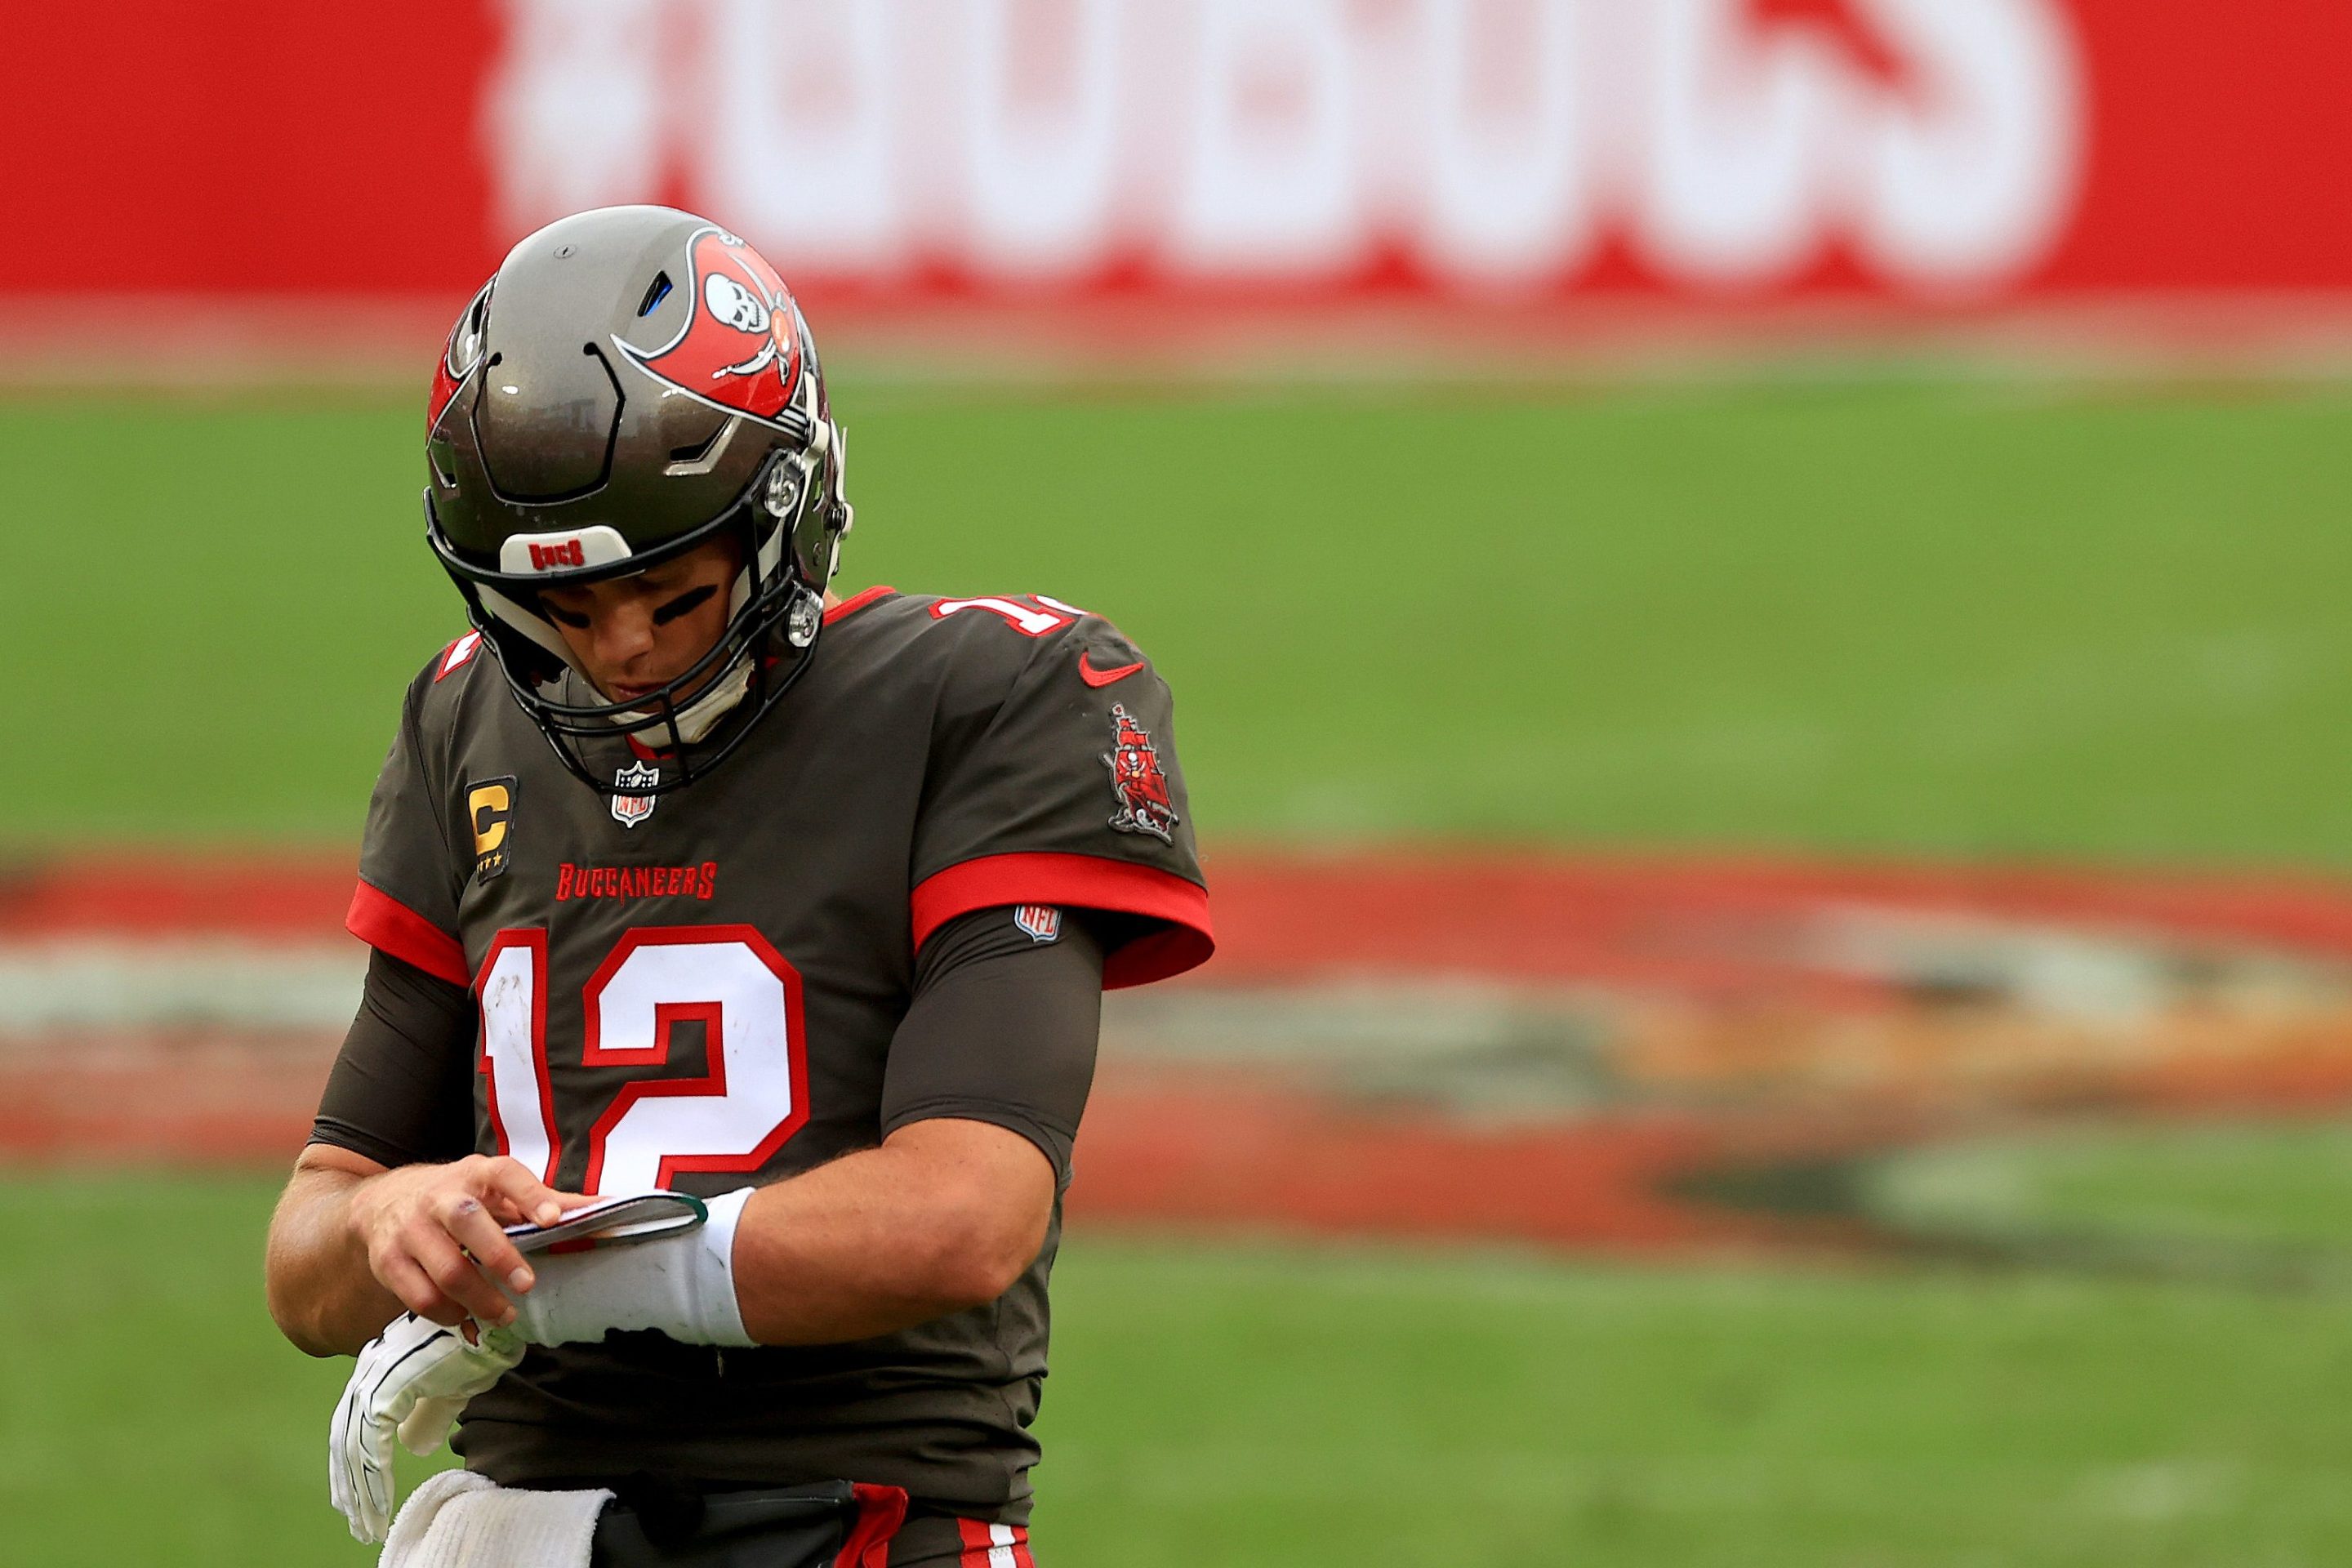 Quarterback Tom Brady looks down at his wristband during a Tampa Bay Buccaneers game.